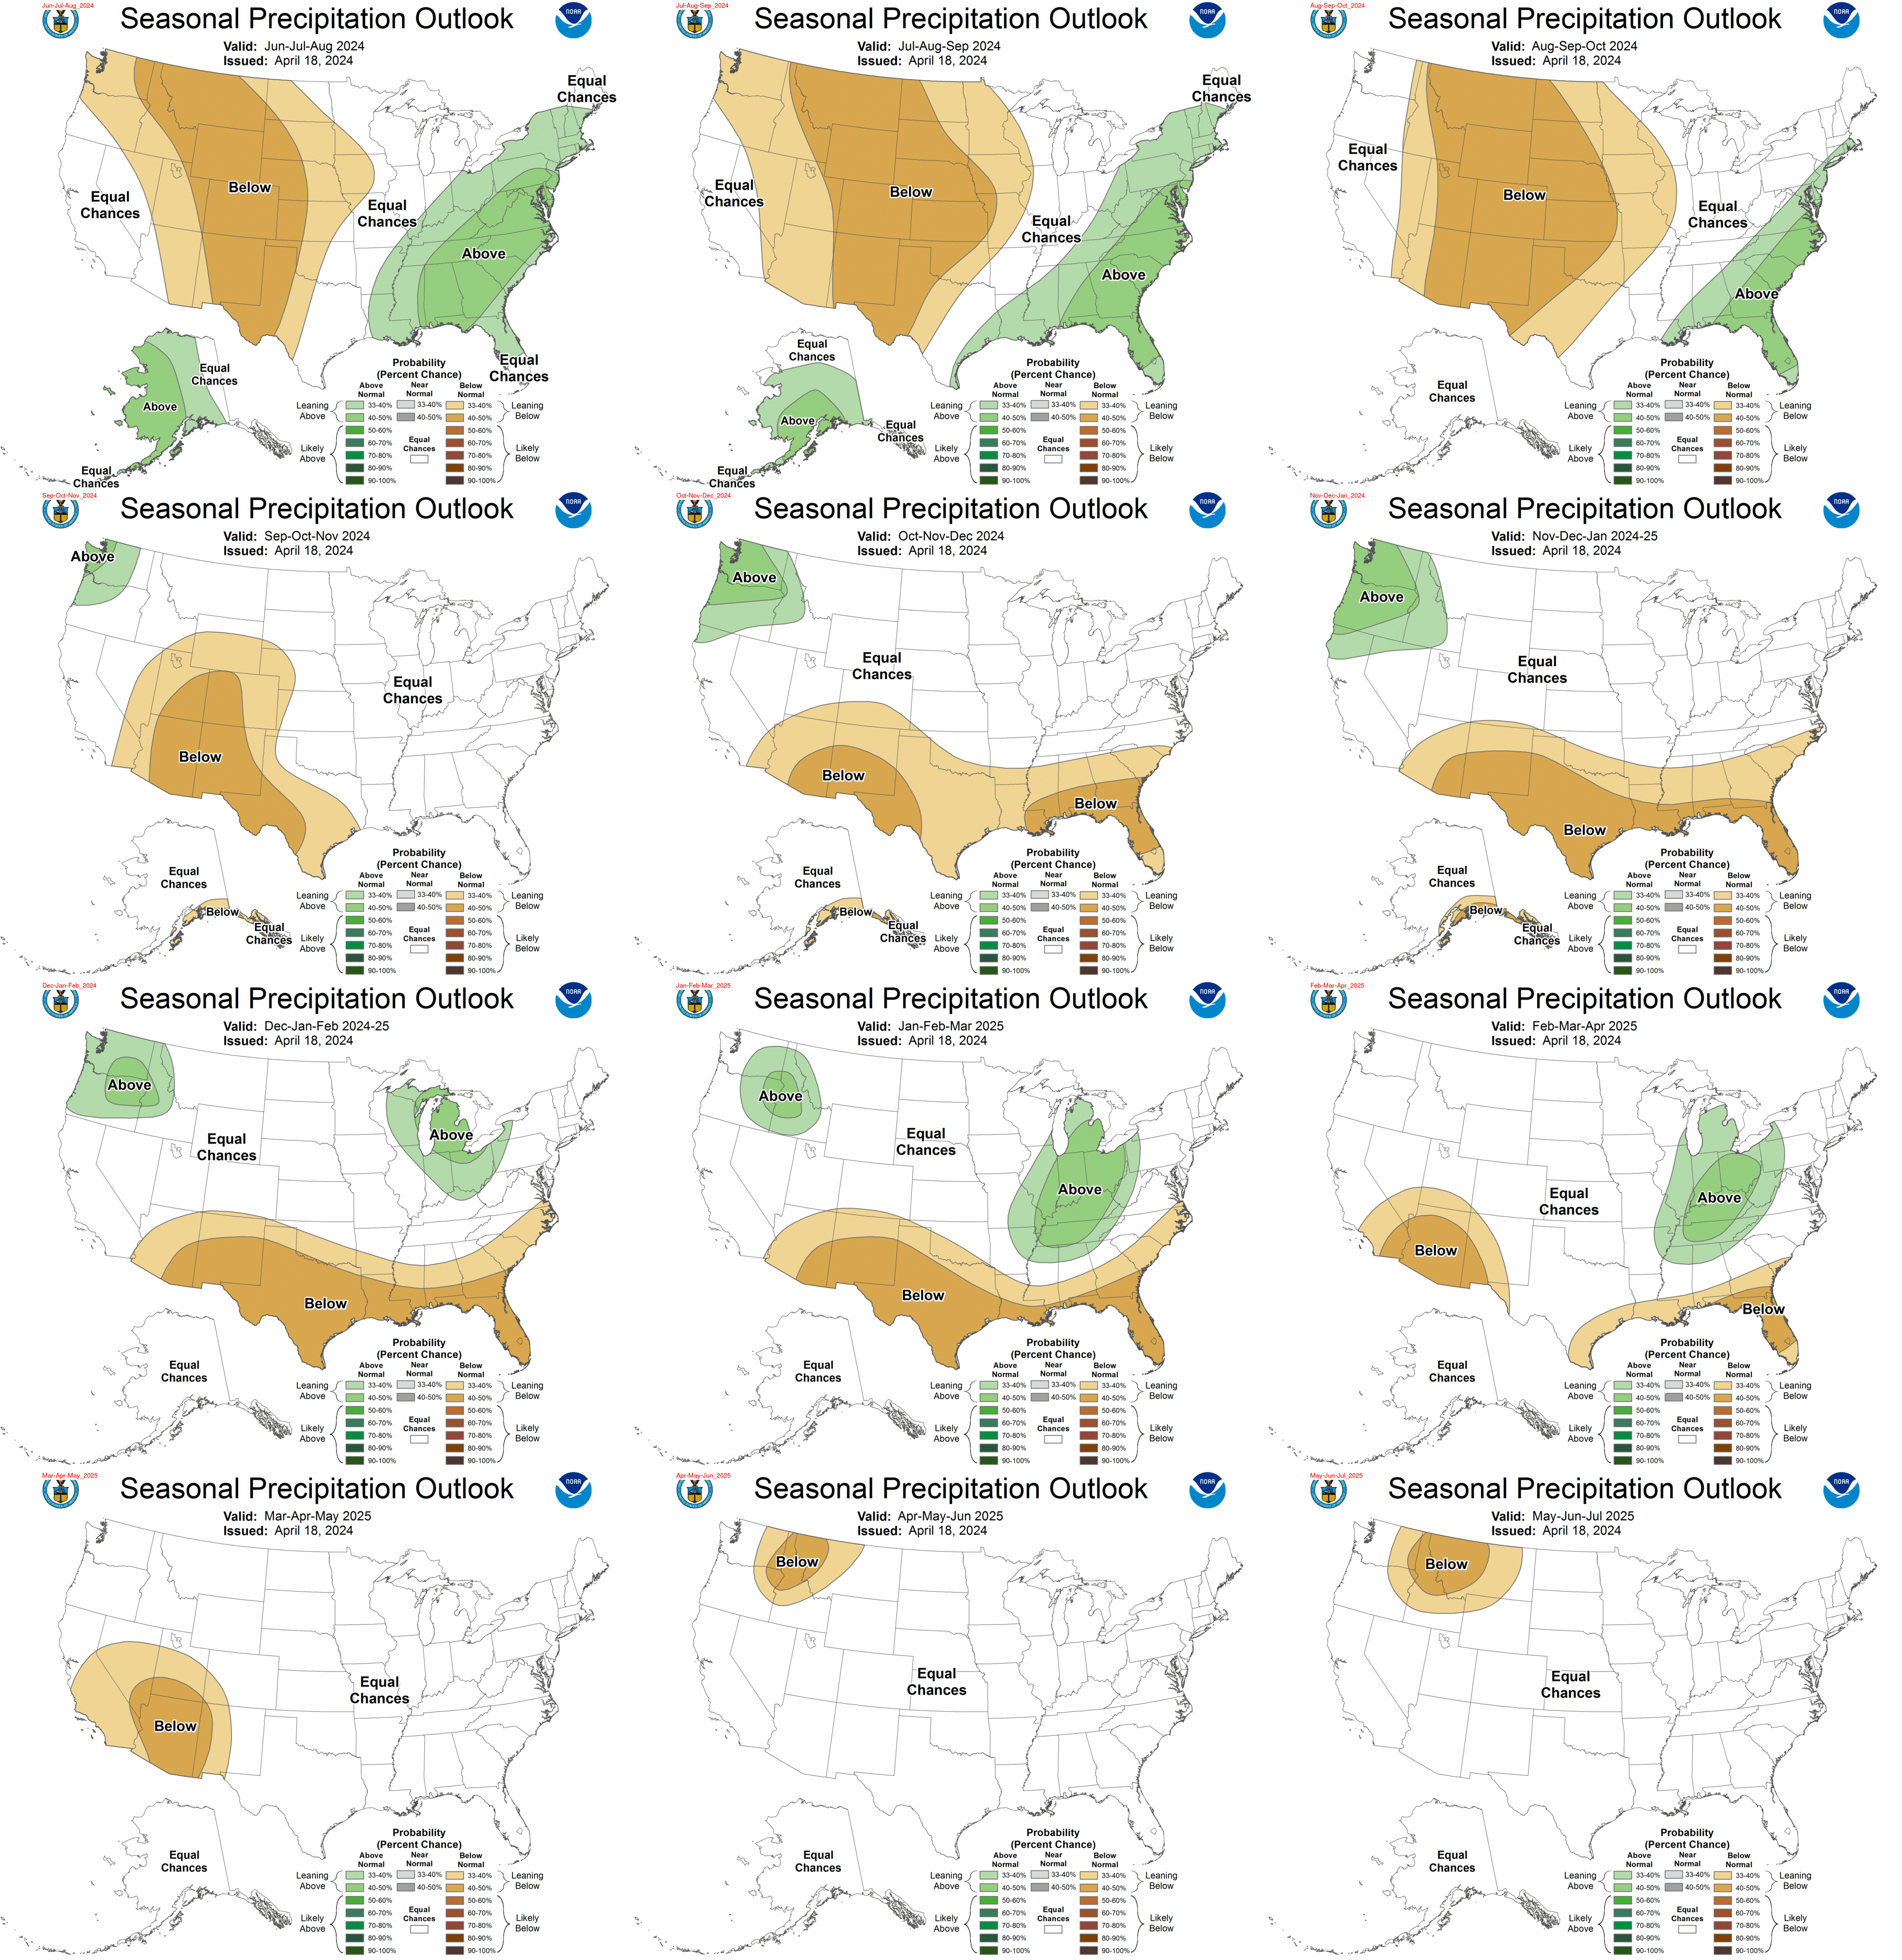 Precipitation outlooks for the upcoming year